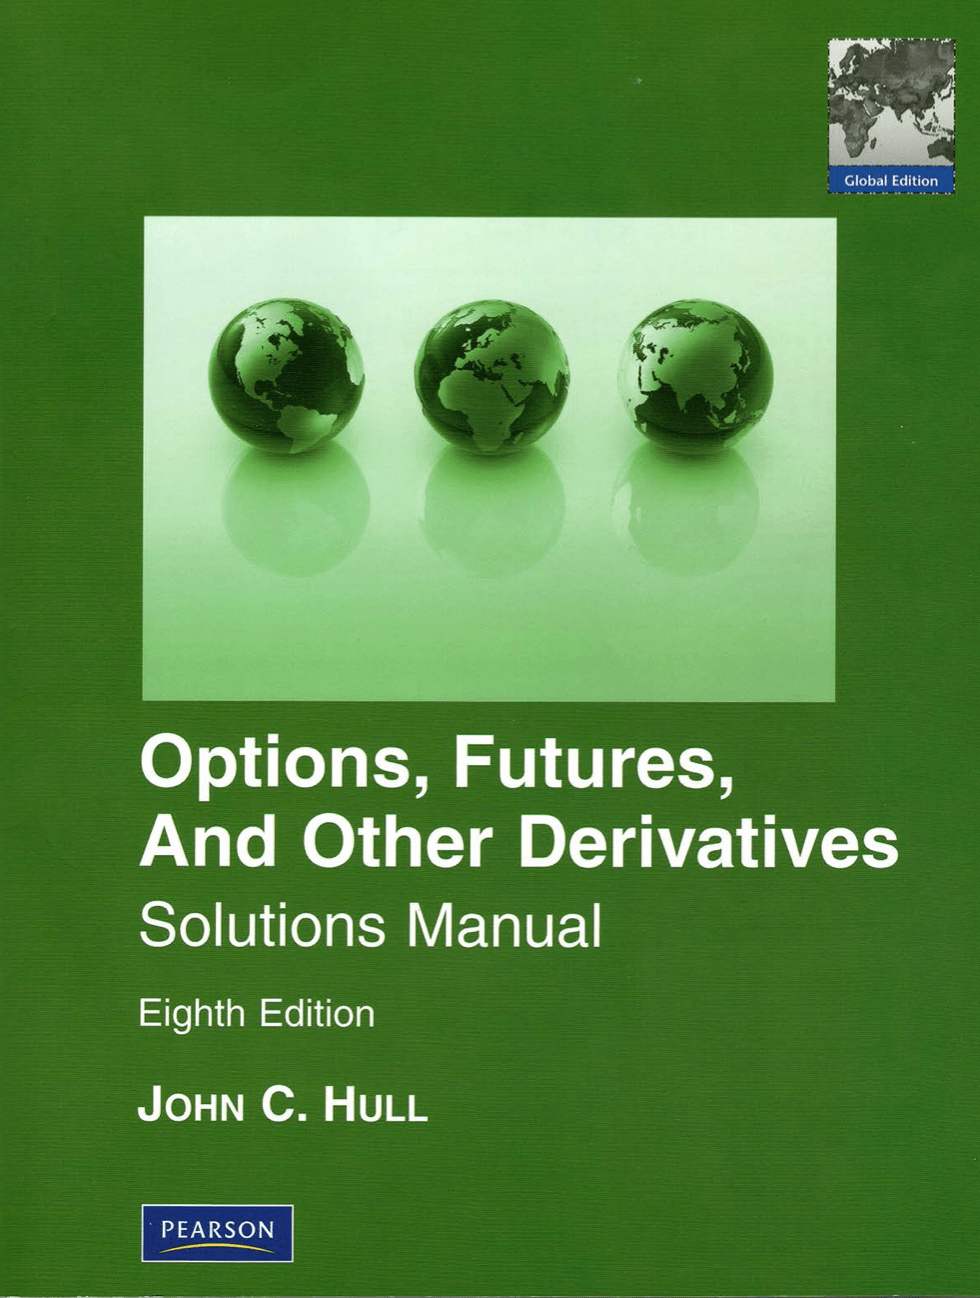 Options, Futures and other Derivatives Solutions Manual read online at BusinessBooks.cc